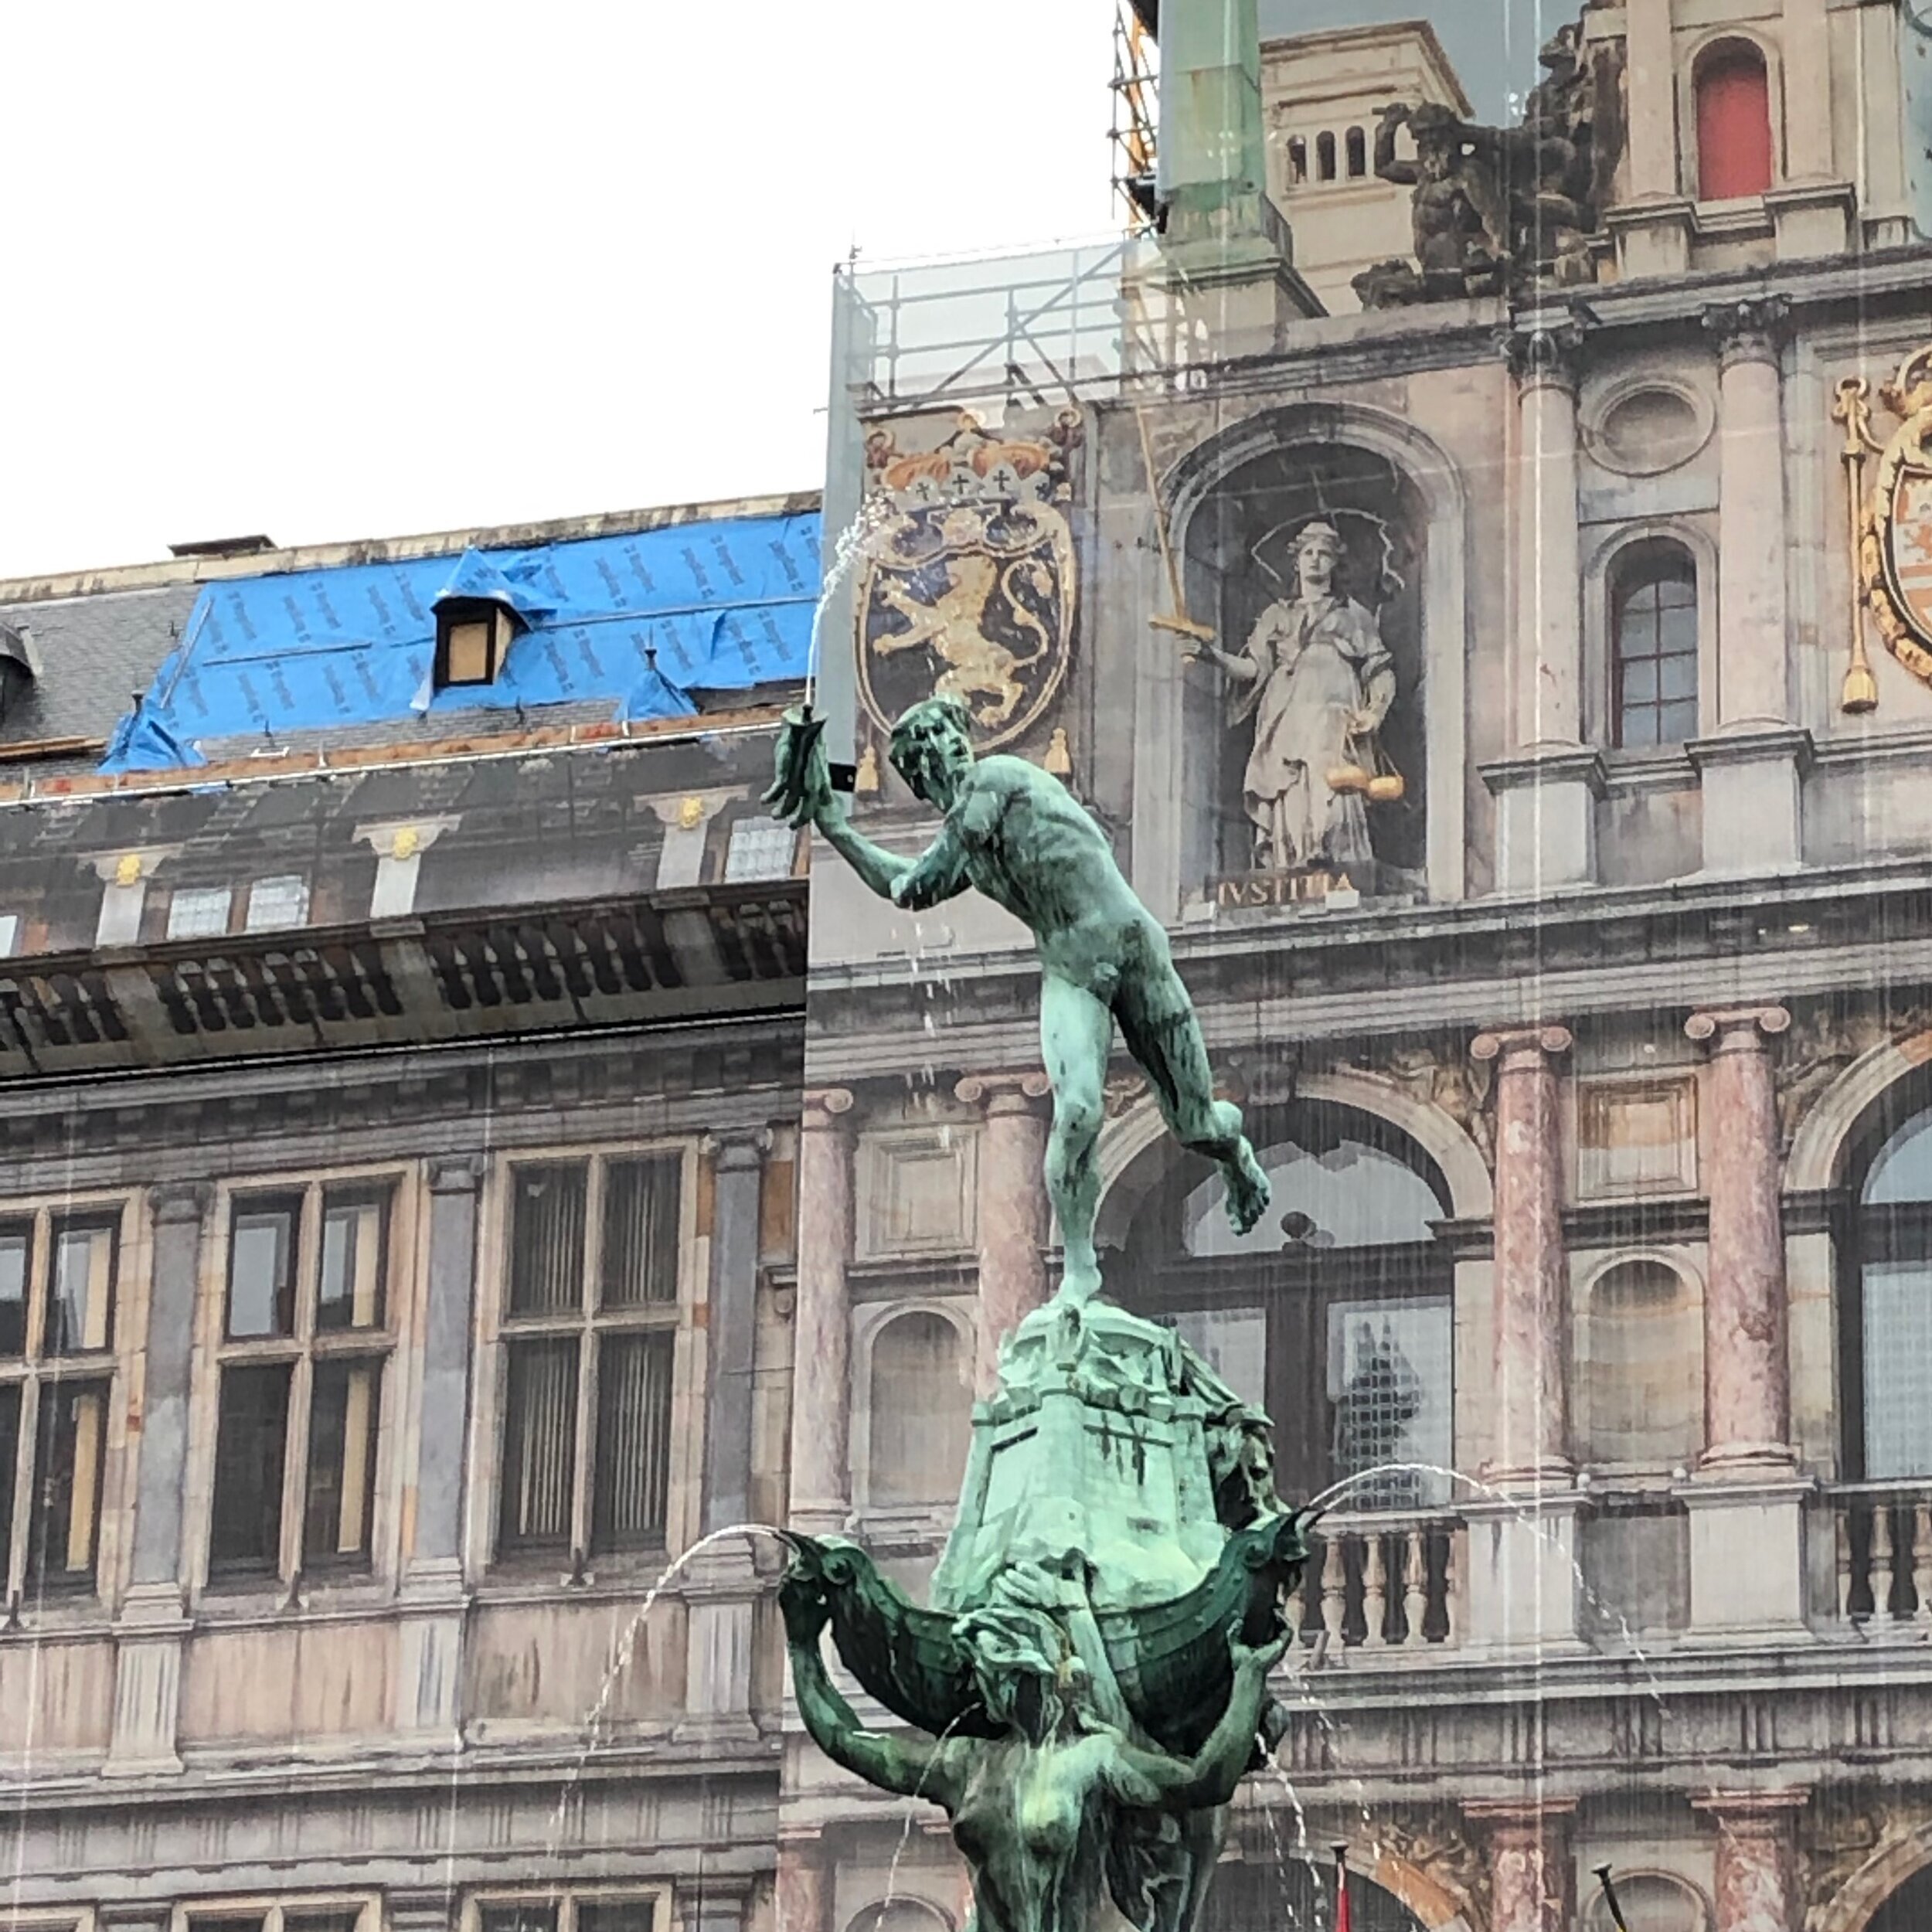 Antwerp City Hall with statues depicting the city's eponymous legend